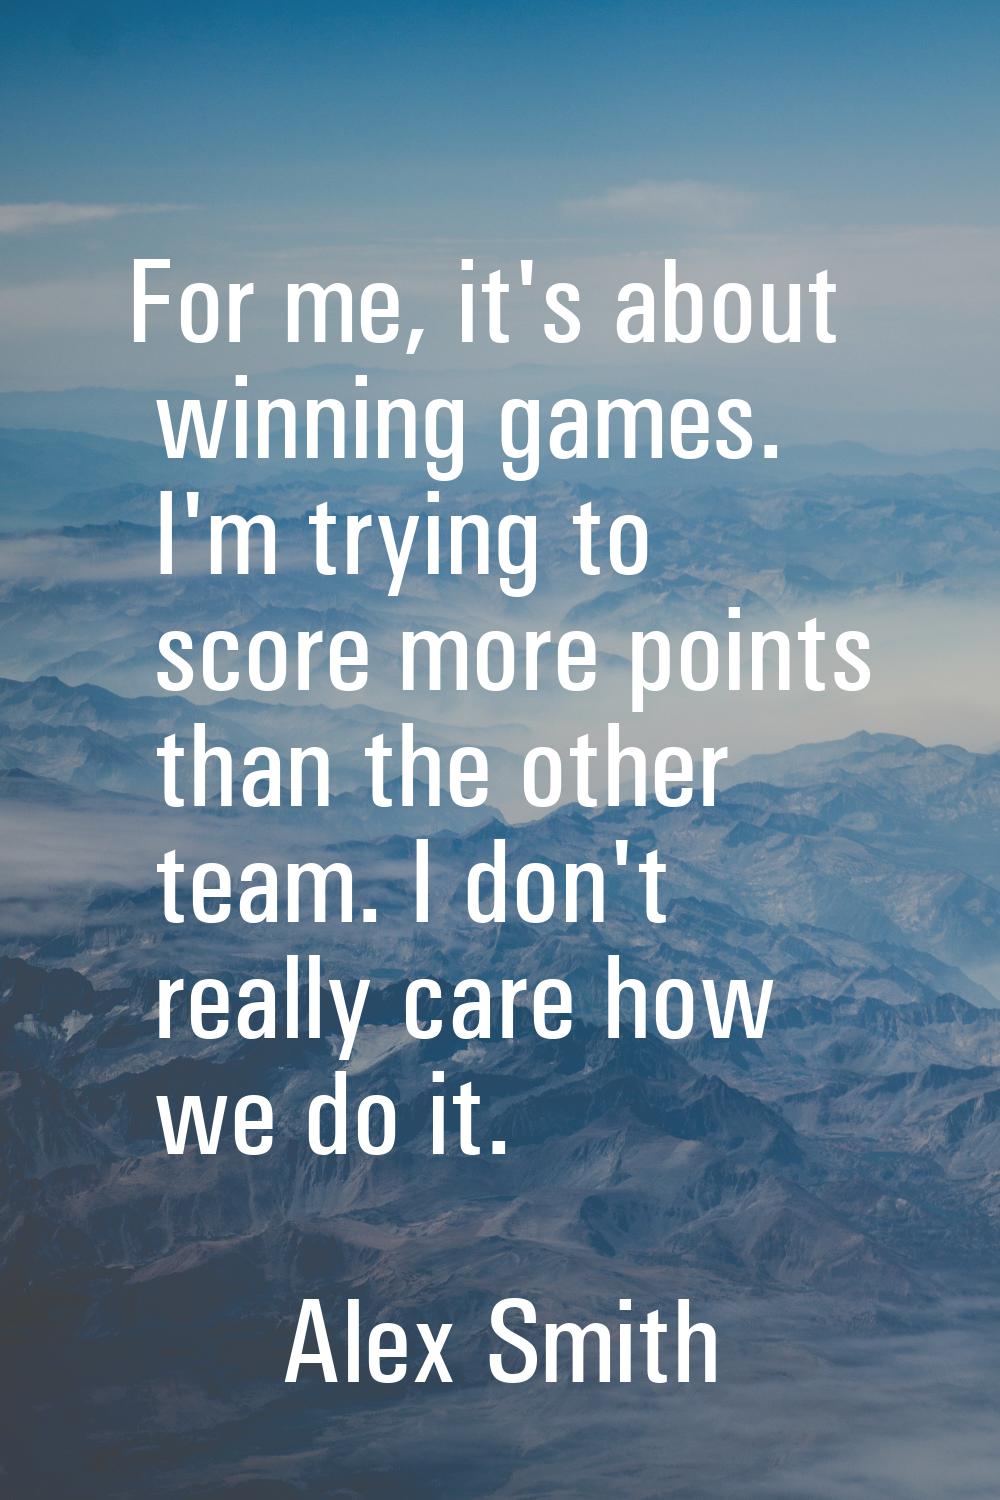 For me, it's about winning games. I'm trying to score more points than the other team. I don't real